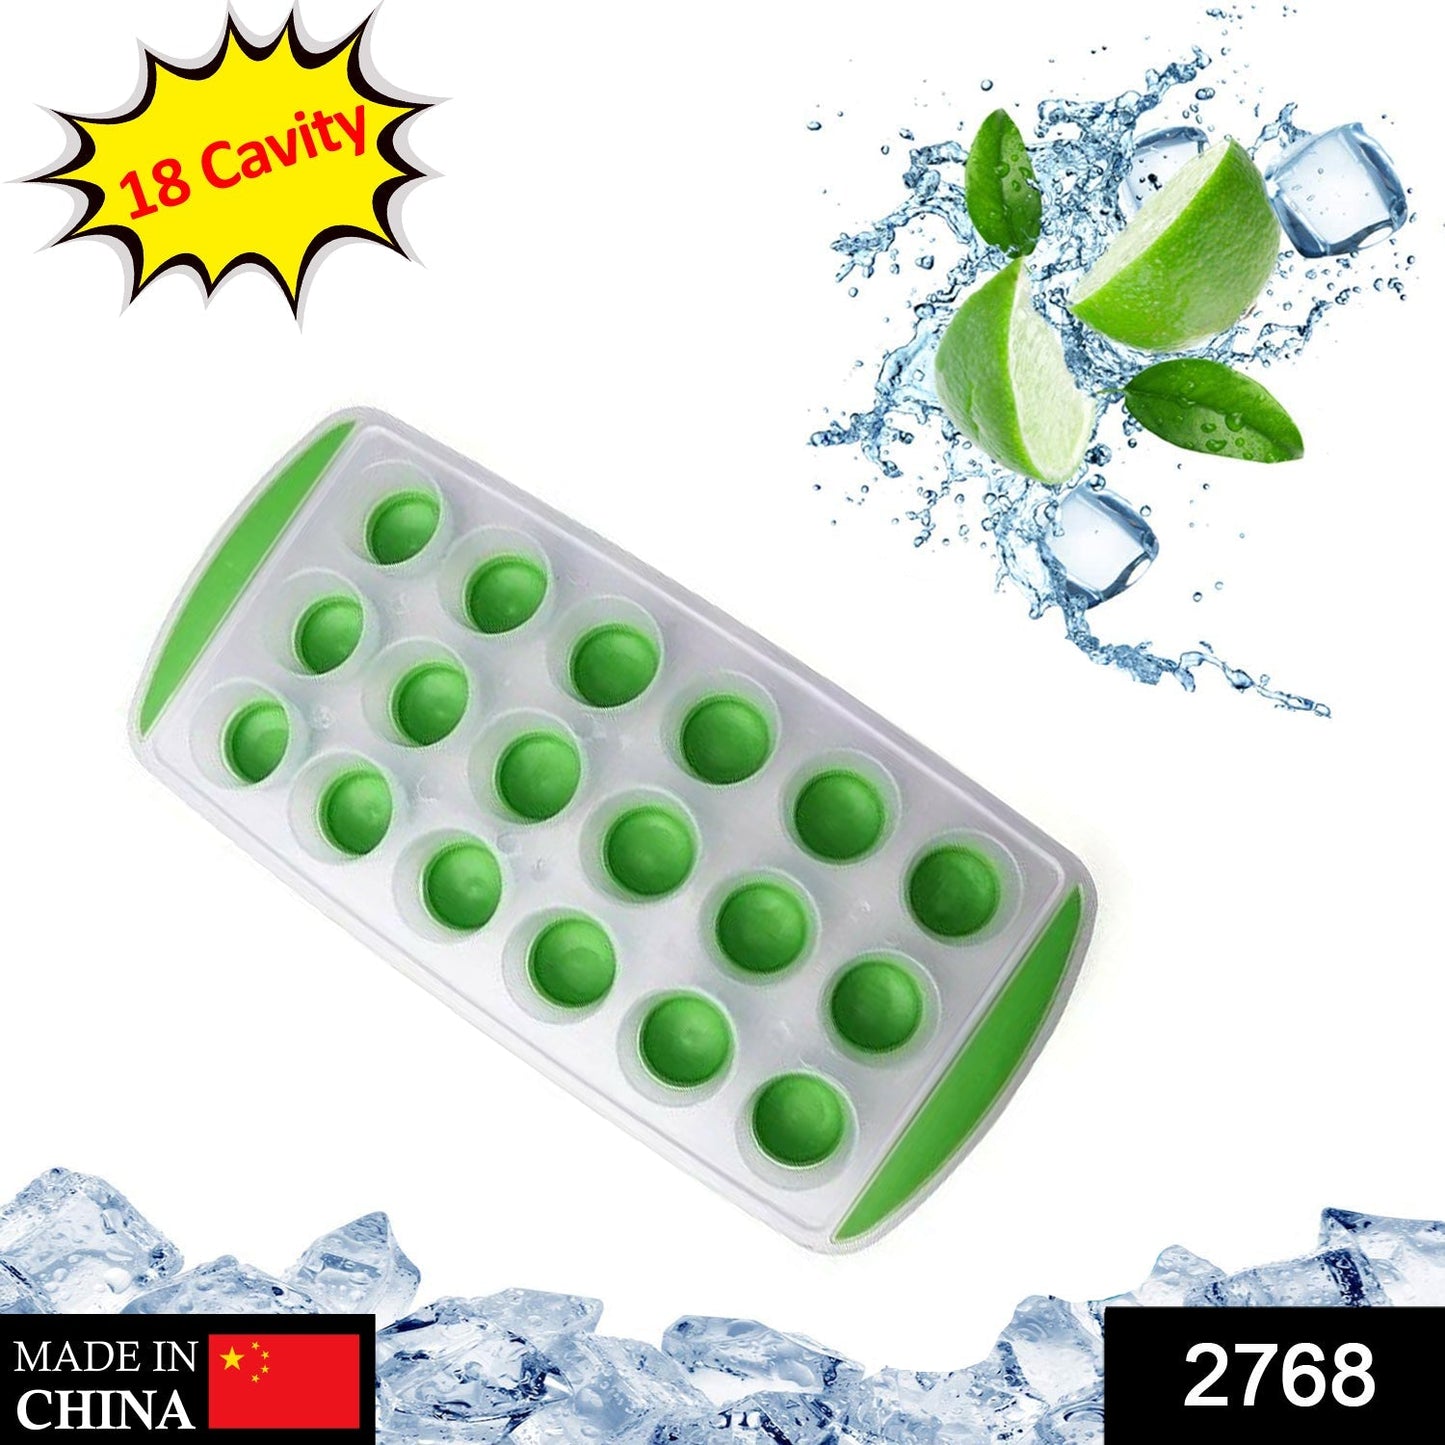 2768 18 Cavity Ice Tray Used For Producing Ice’s In Types Of Places Etc.